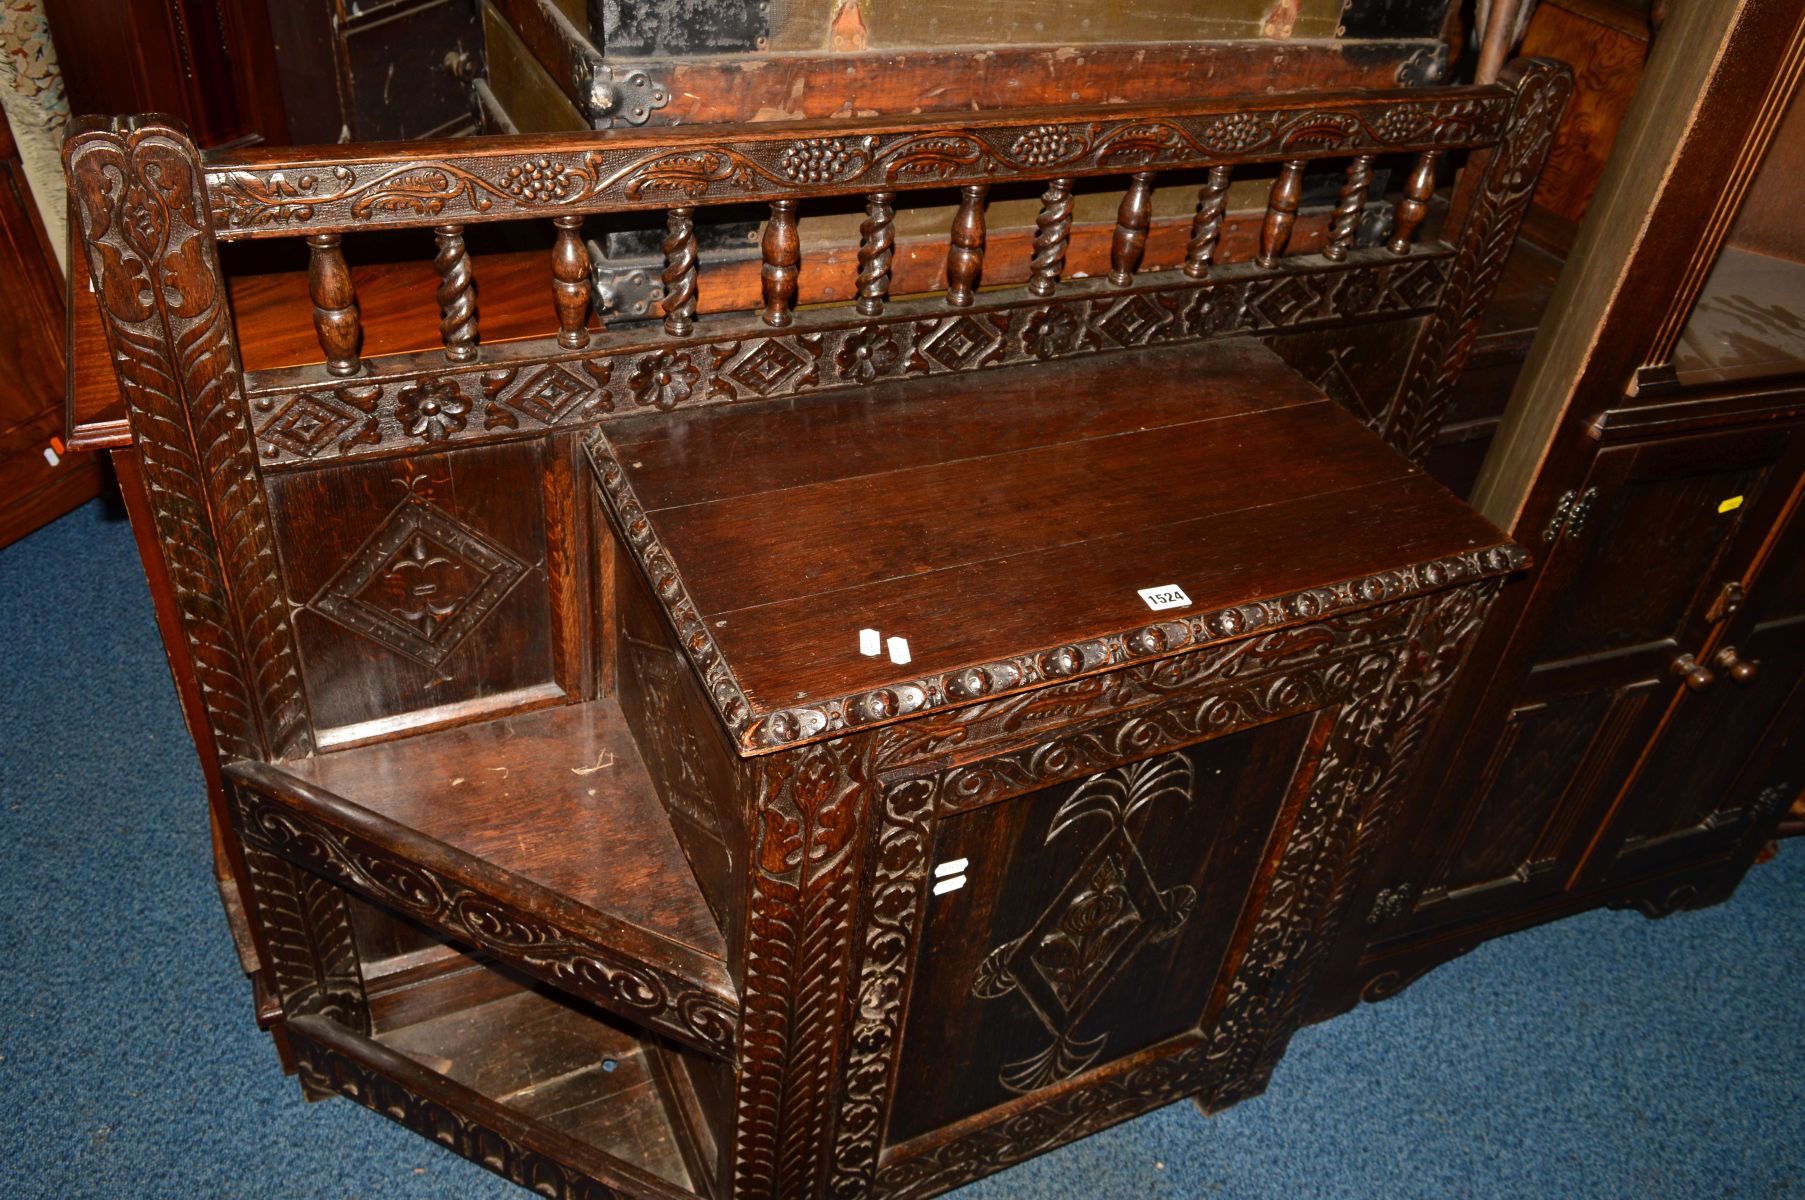 AN EARLY 20TH CENTURY OAK CANTED HALL STAND, carved with grapes, foliage and geometric decoration, - Image 2 of 3